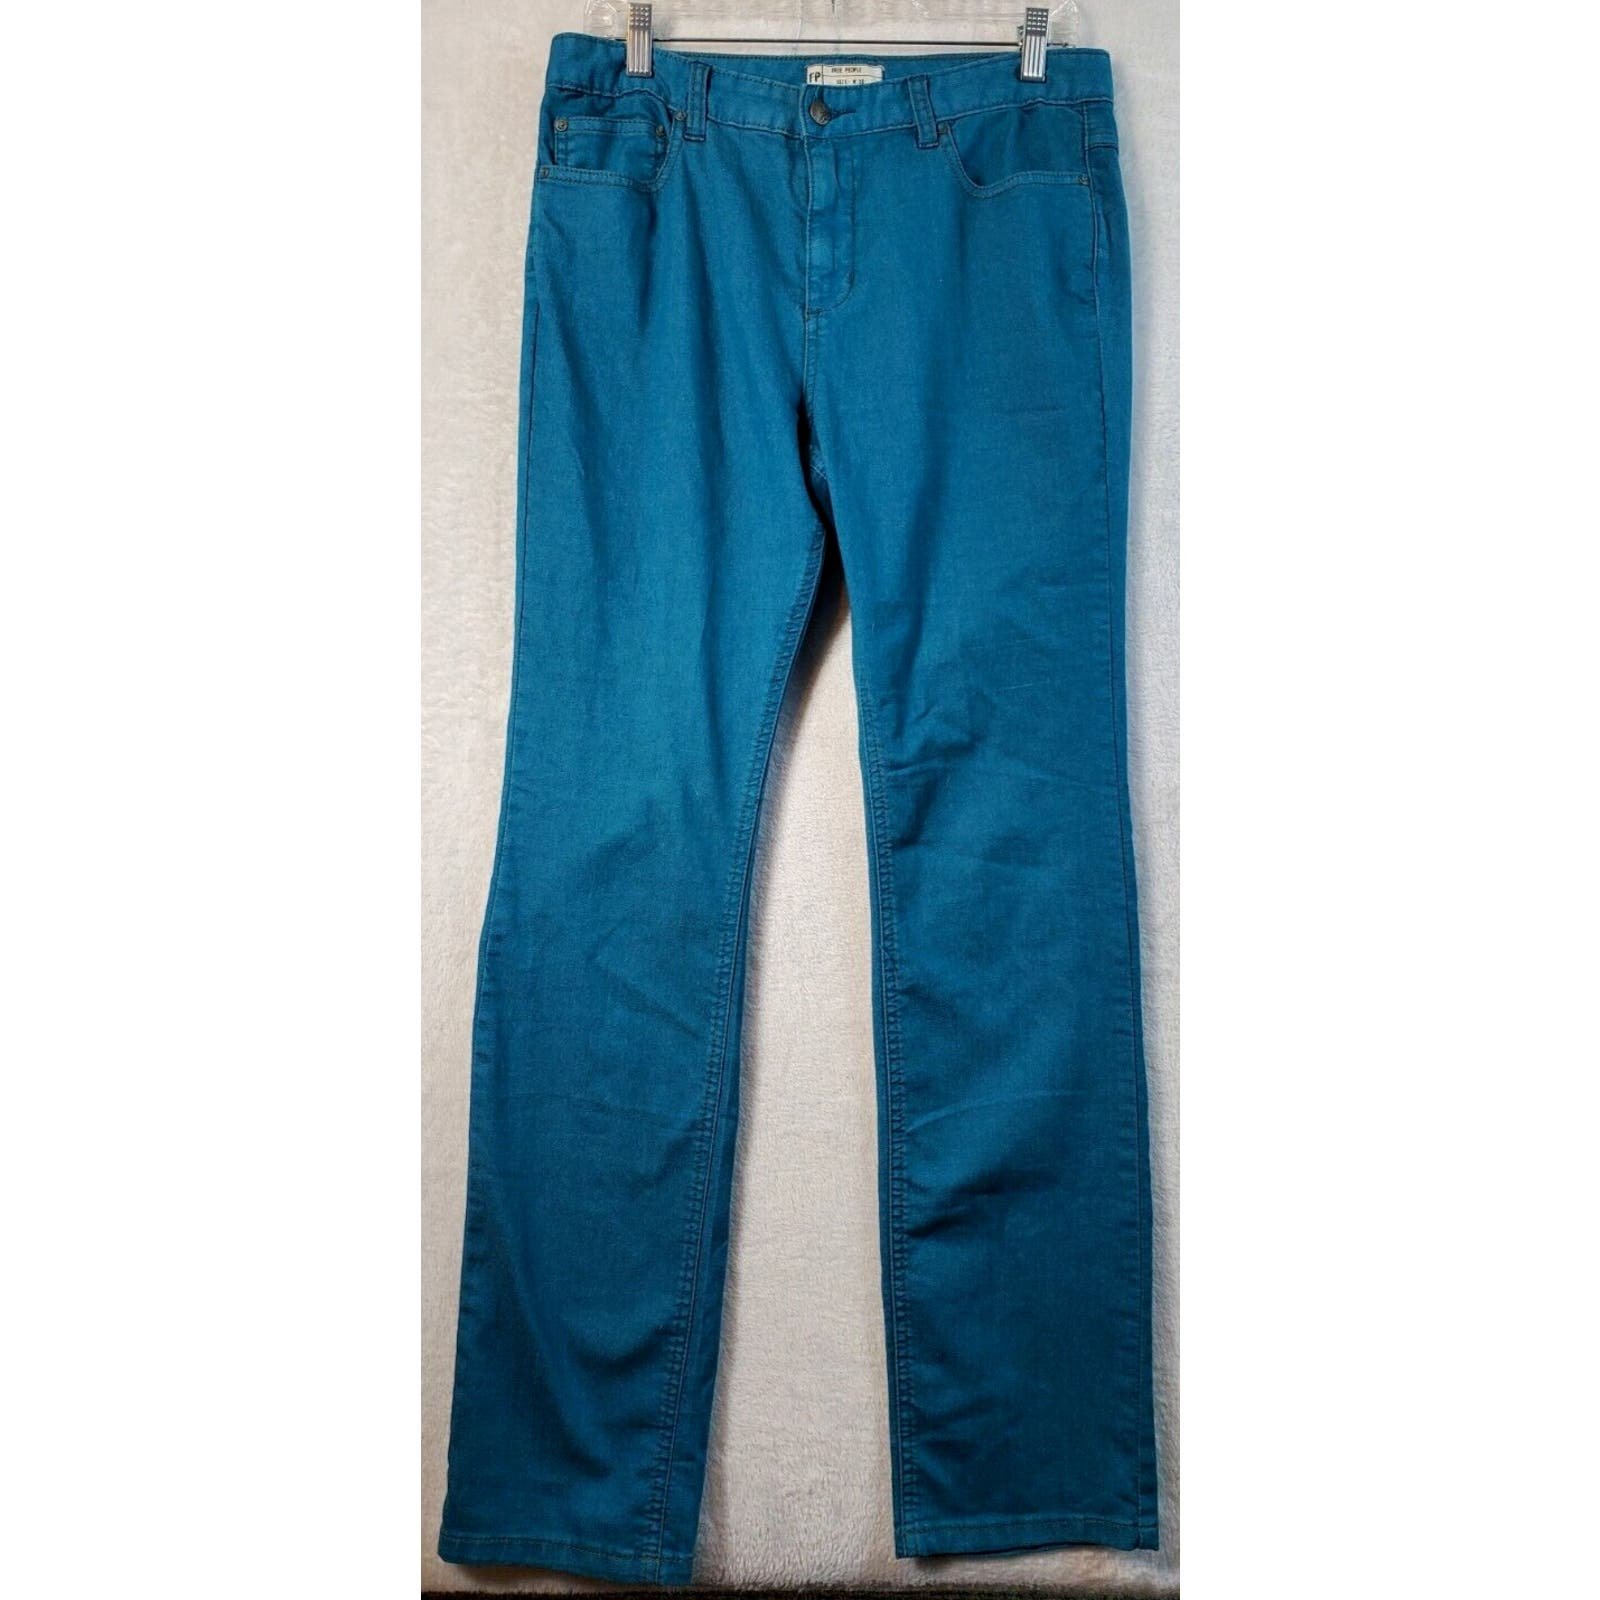 Discounted Free People Pants Womens Size 30 Teal Pocket